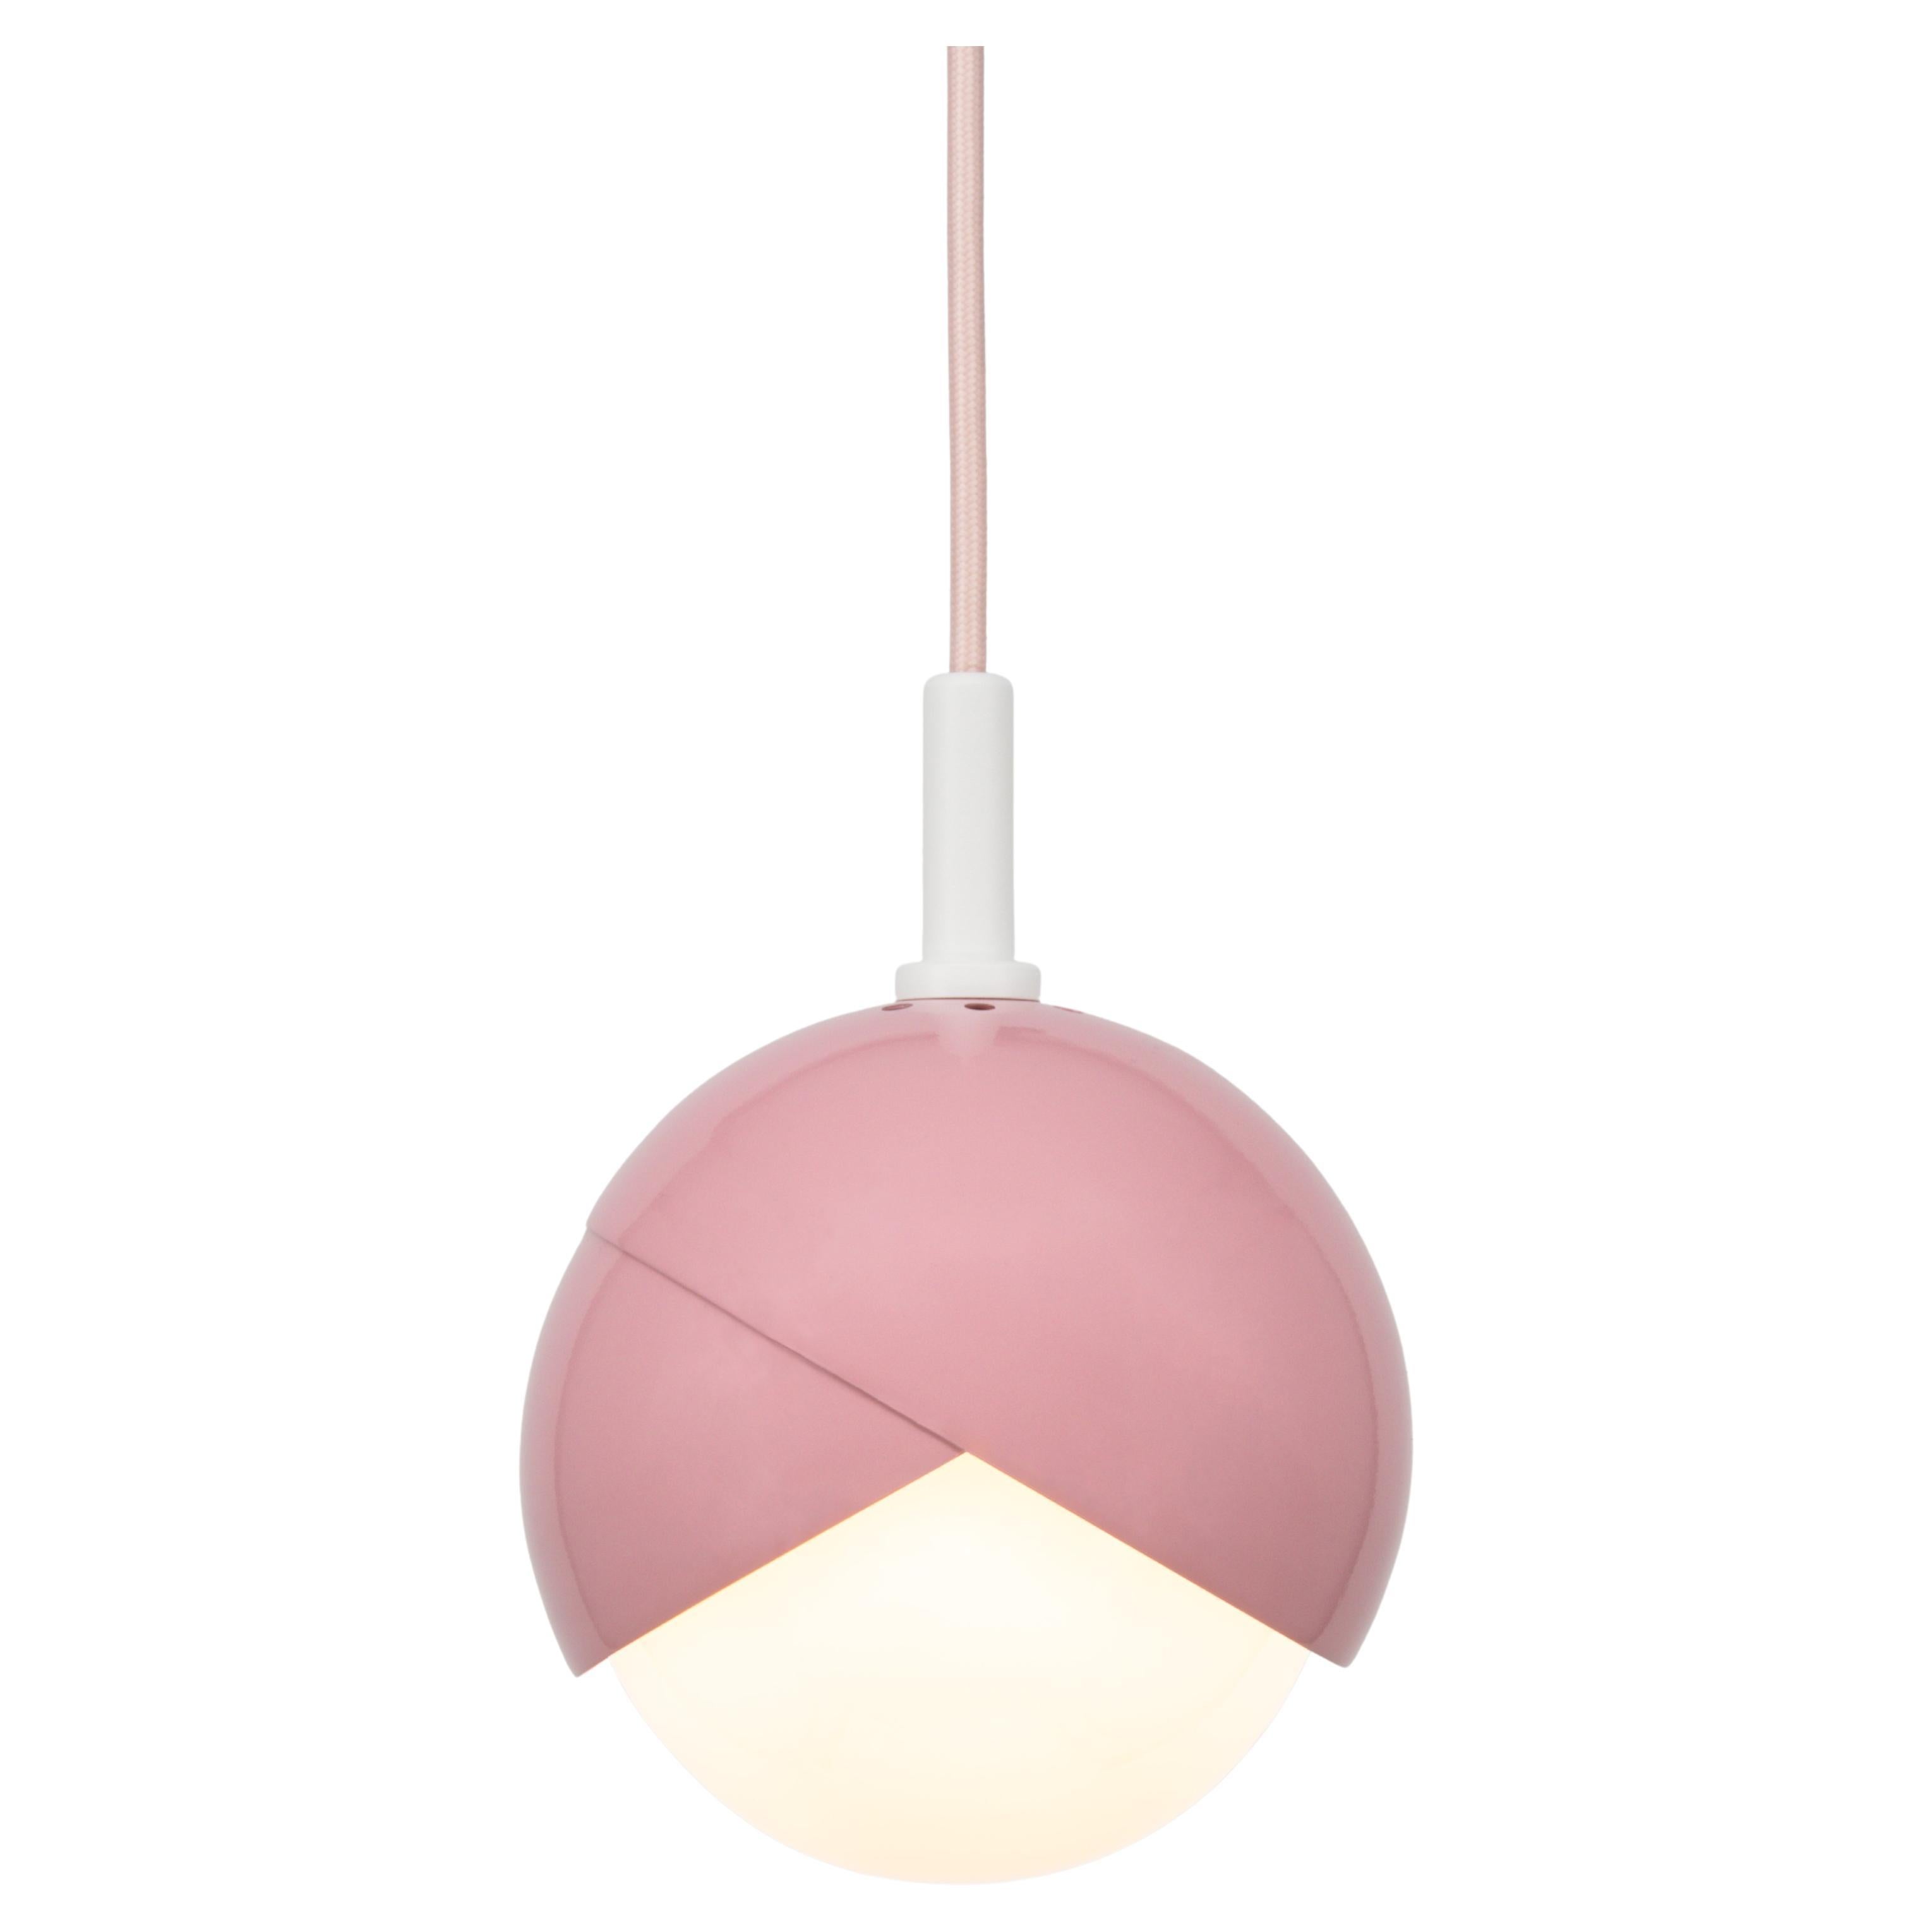 Benedict Pendant Light in Pink and White Powder Coat, Pink Cord, Small 